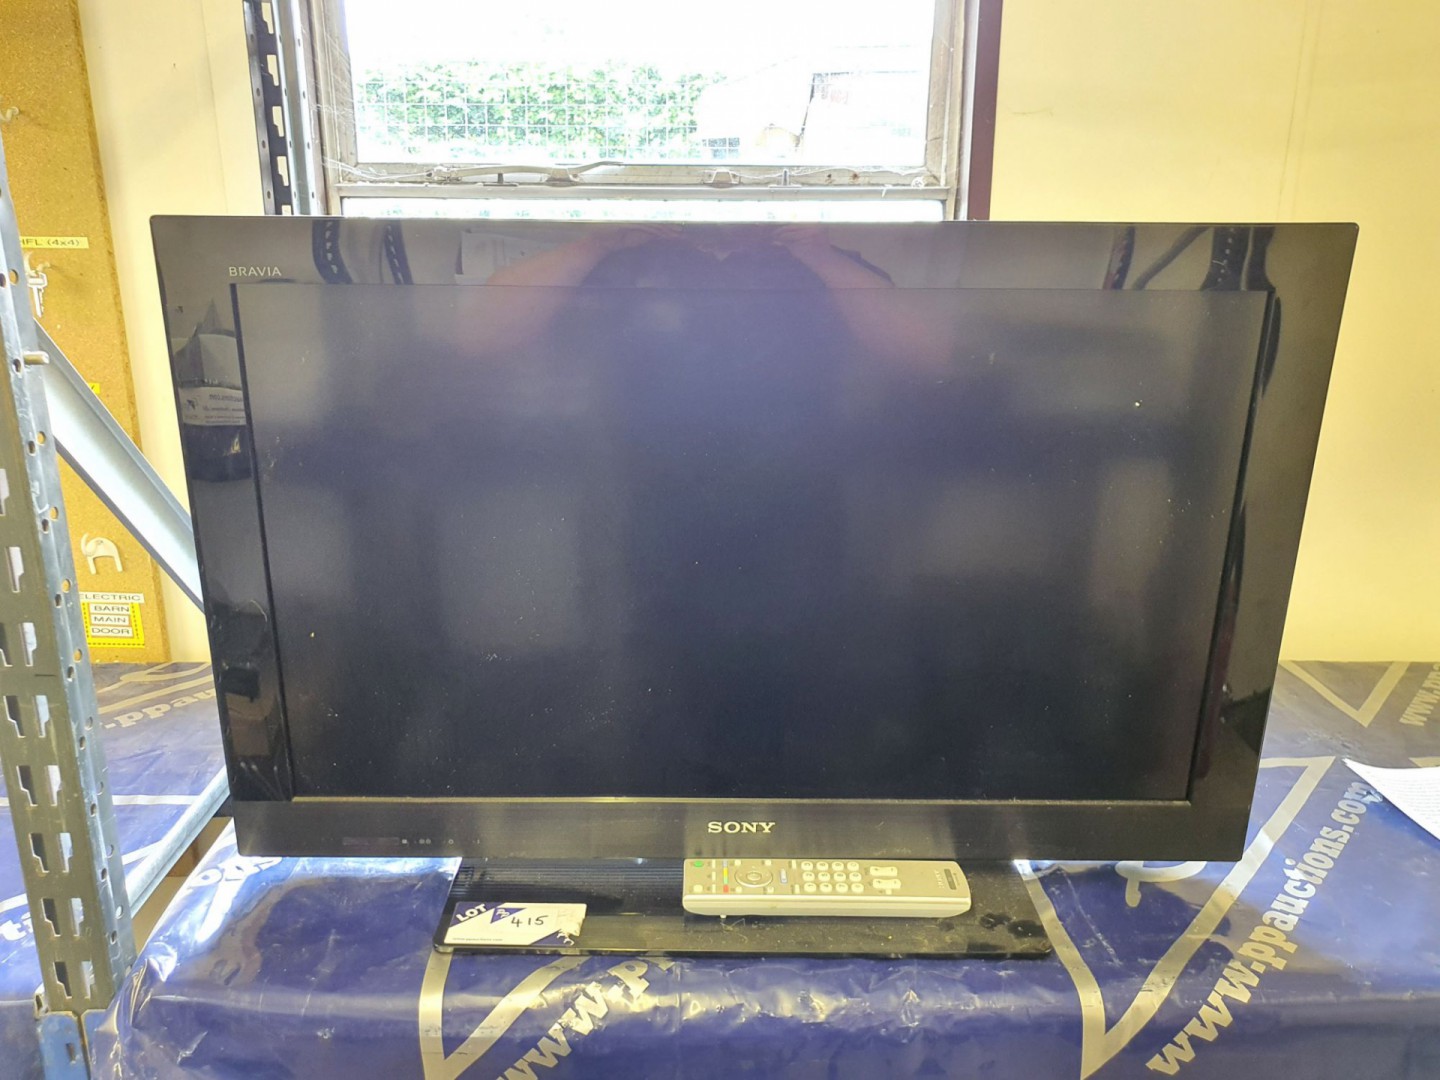 Sony KDL-32CX523 LCD TV on stand with remote